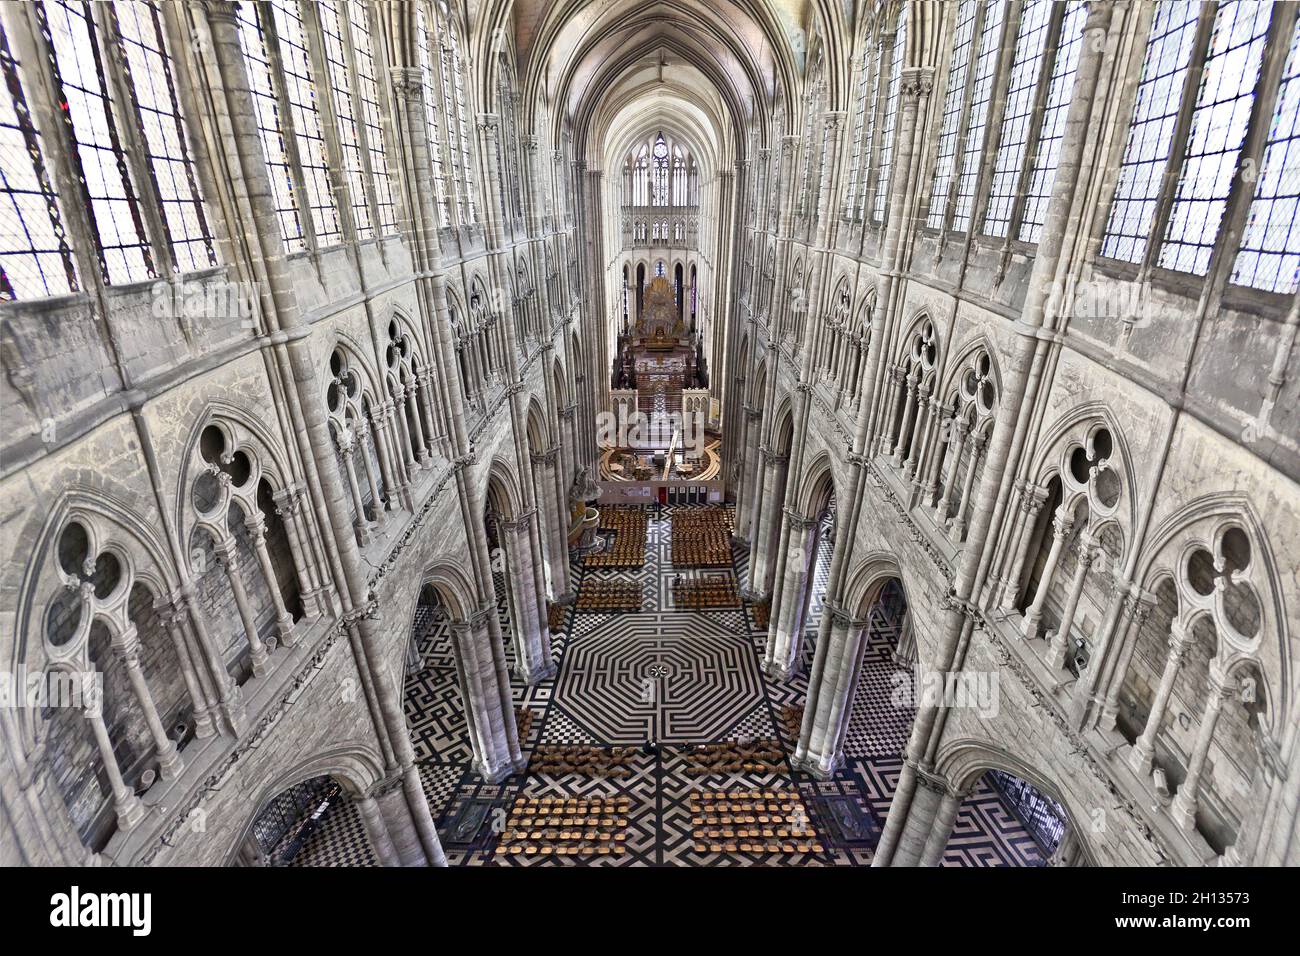 FRANCE - PICARDY - SOMME (80) - AMIENS : CATHEDRAL NOTRE DAME (UNESCO WORLD HERITAGE) Stock Photo